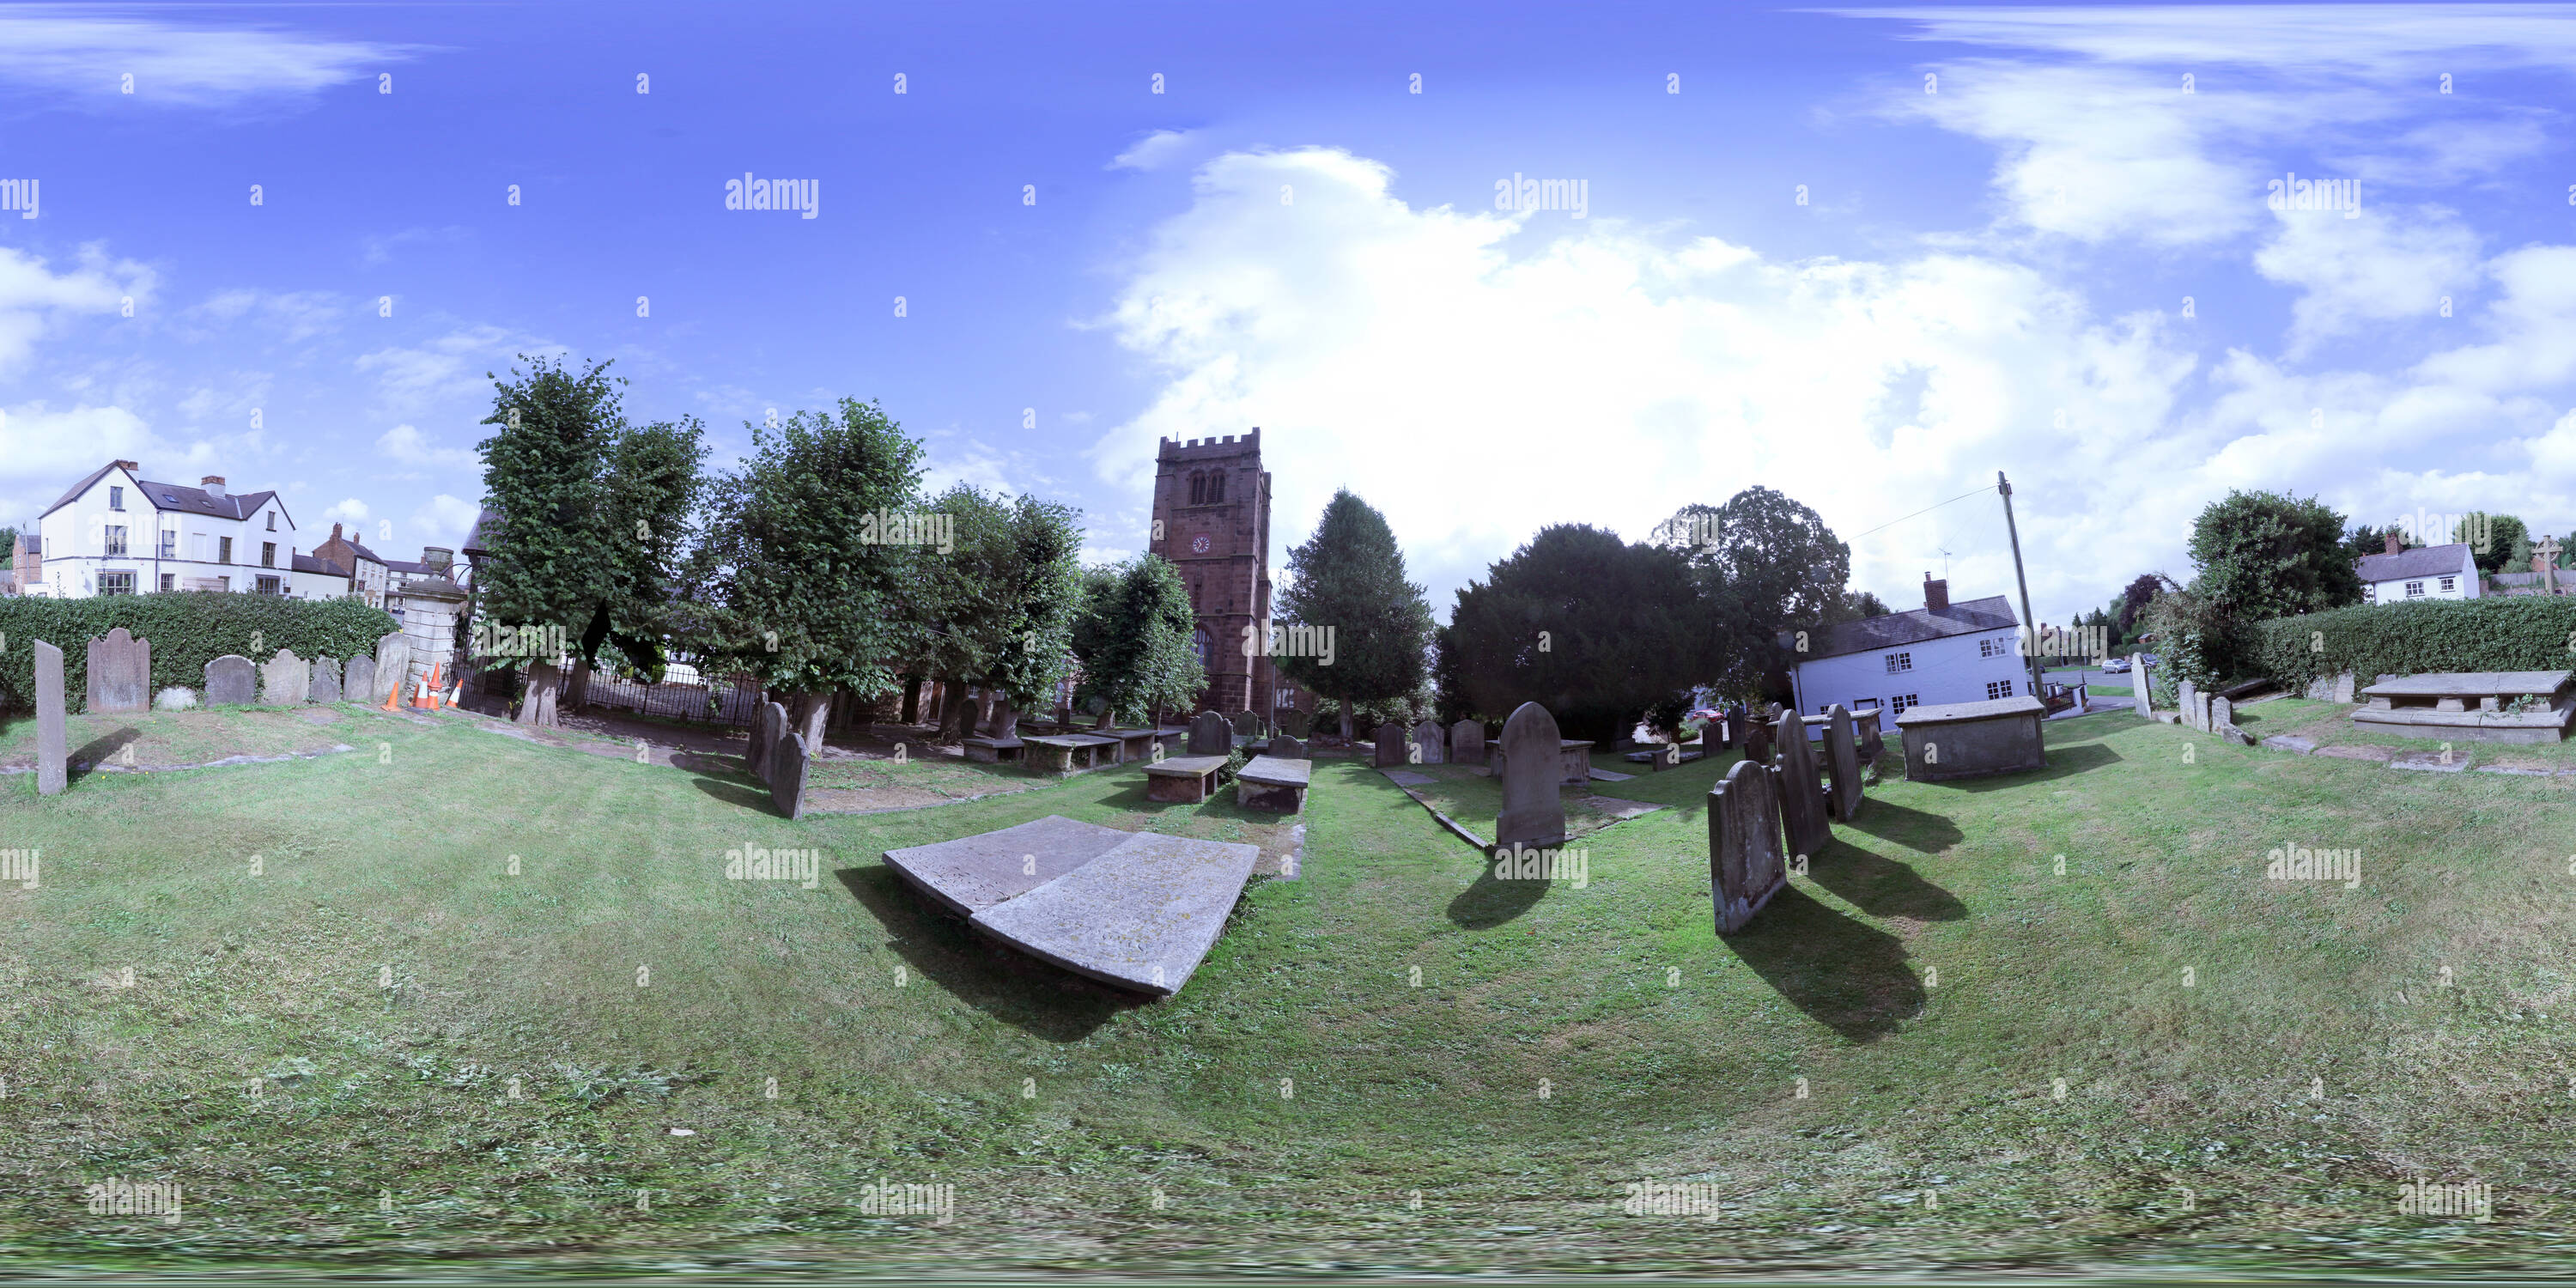 360 degree panoramic view of St. Andrews Church Tarvin front